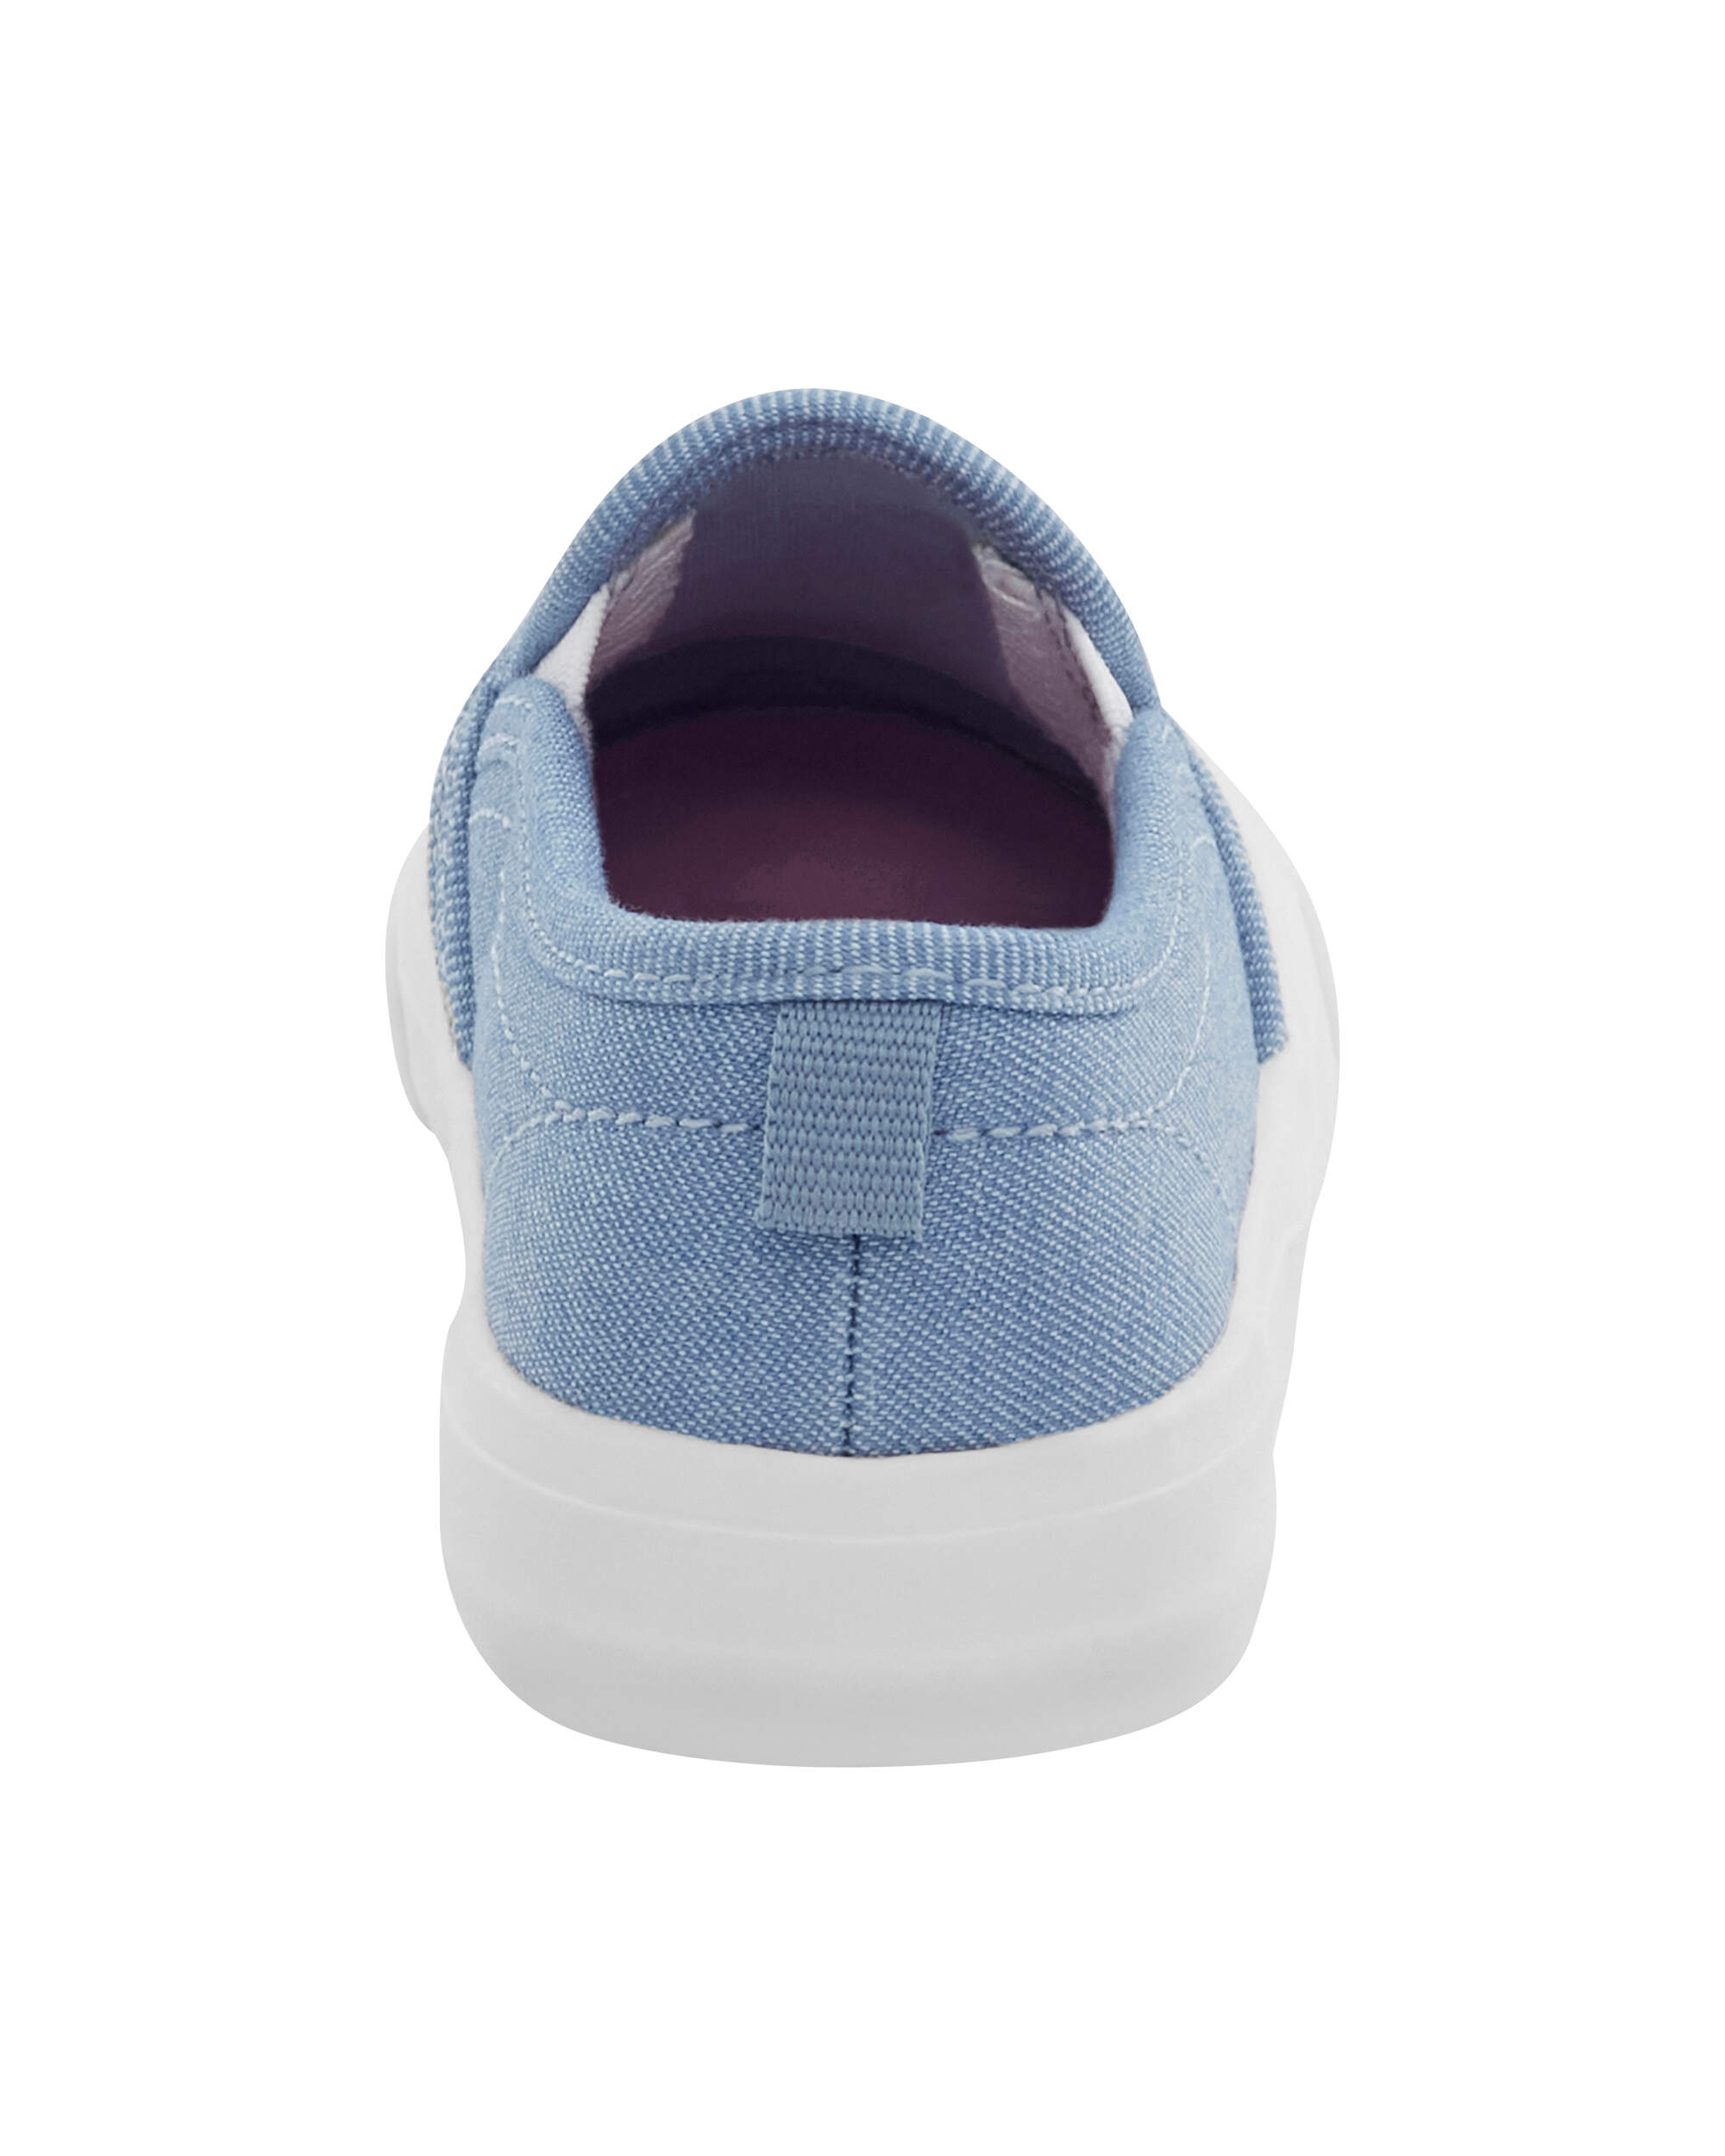 Floral Chambray Slip-On Shoes